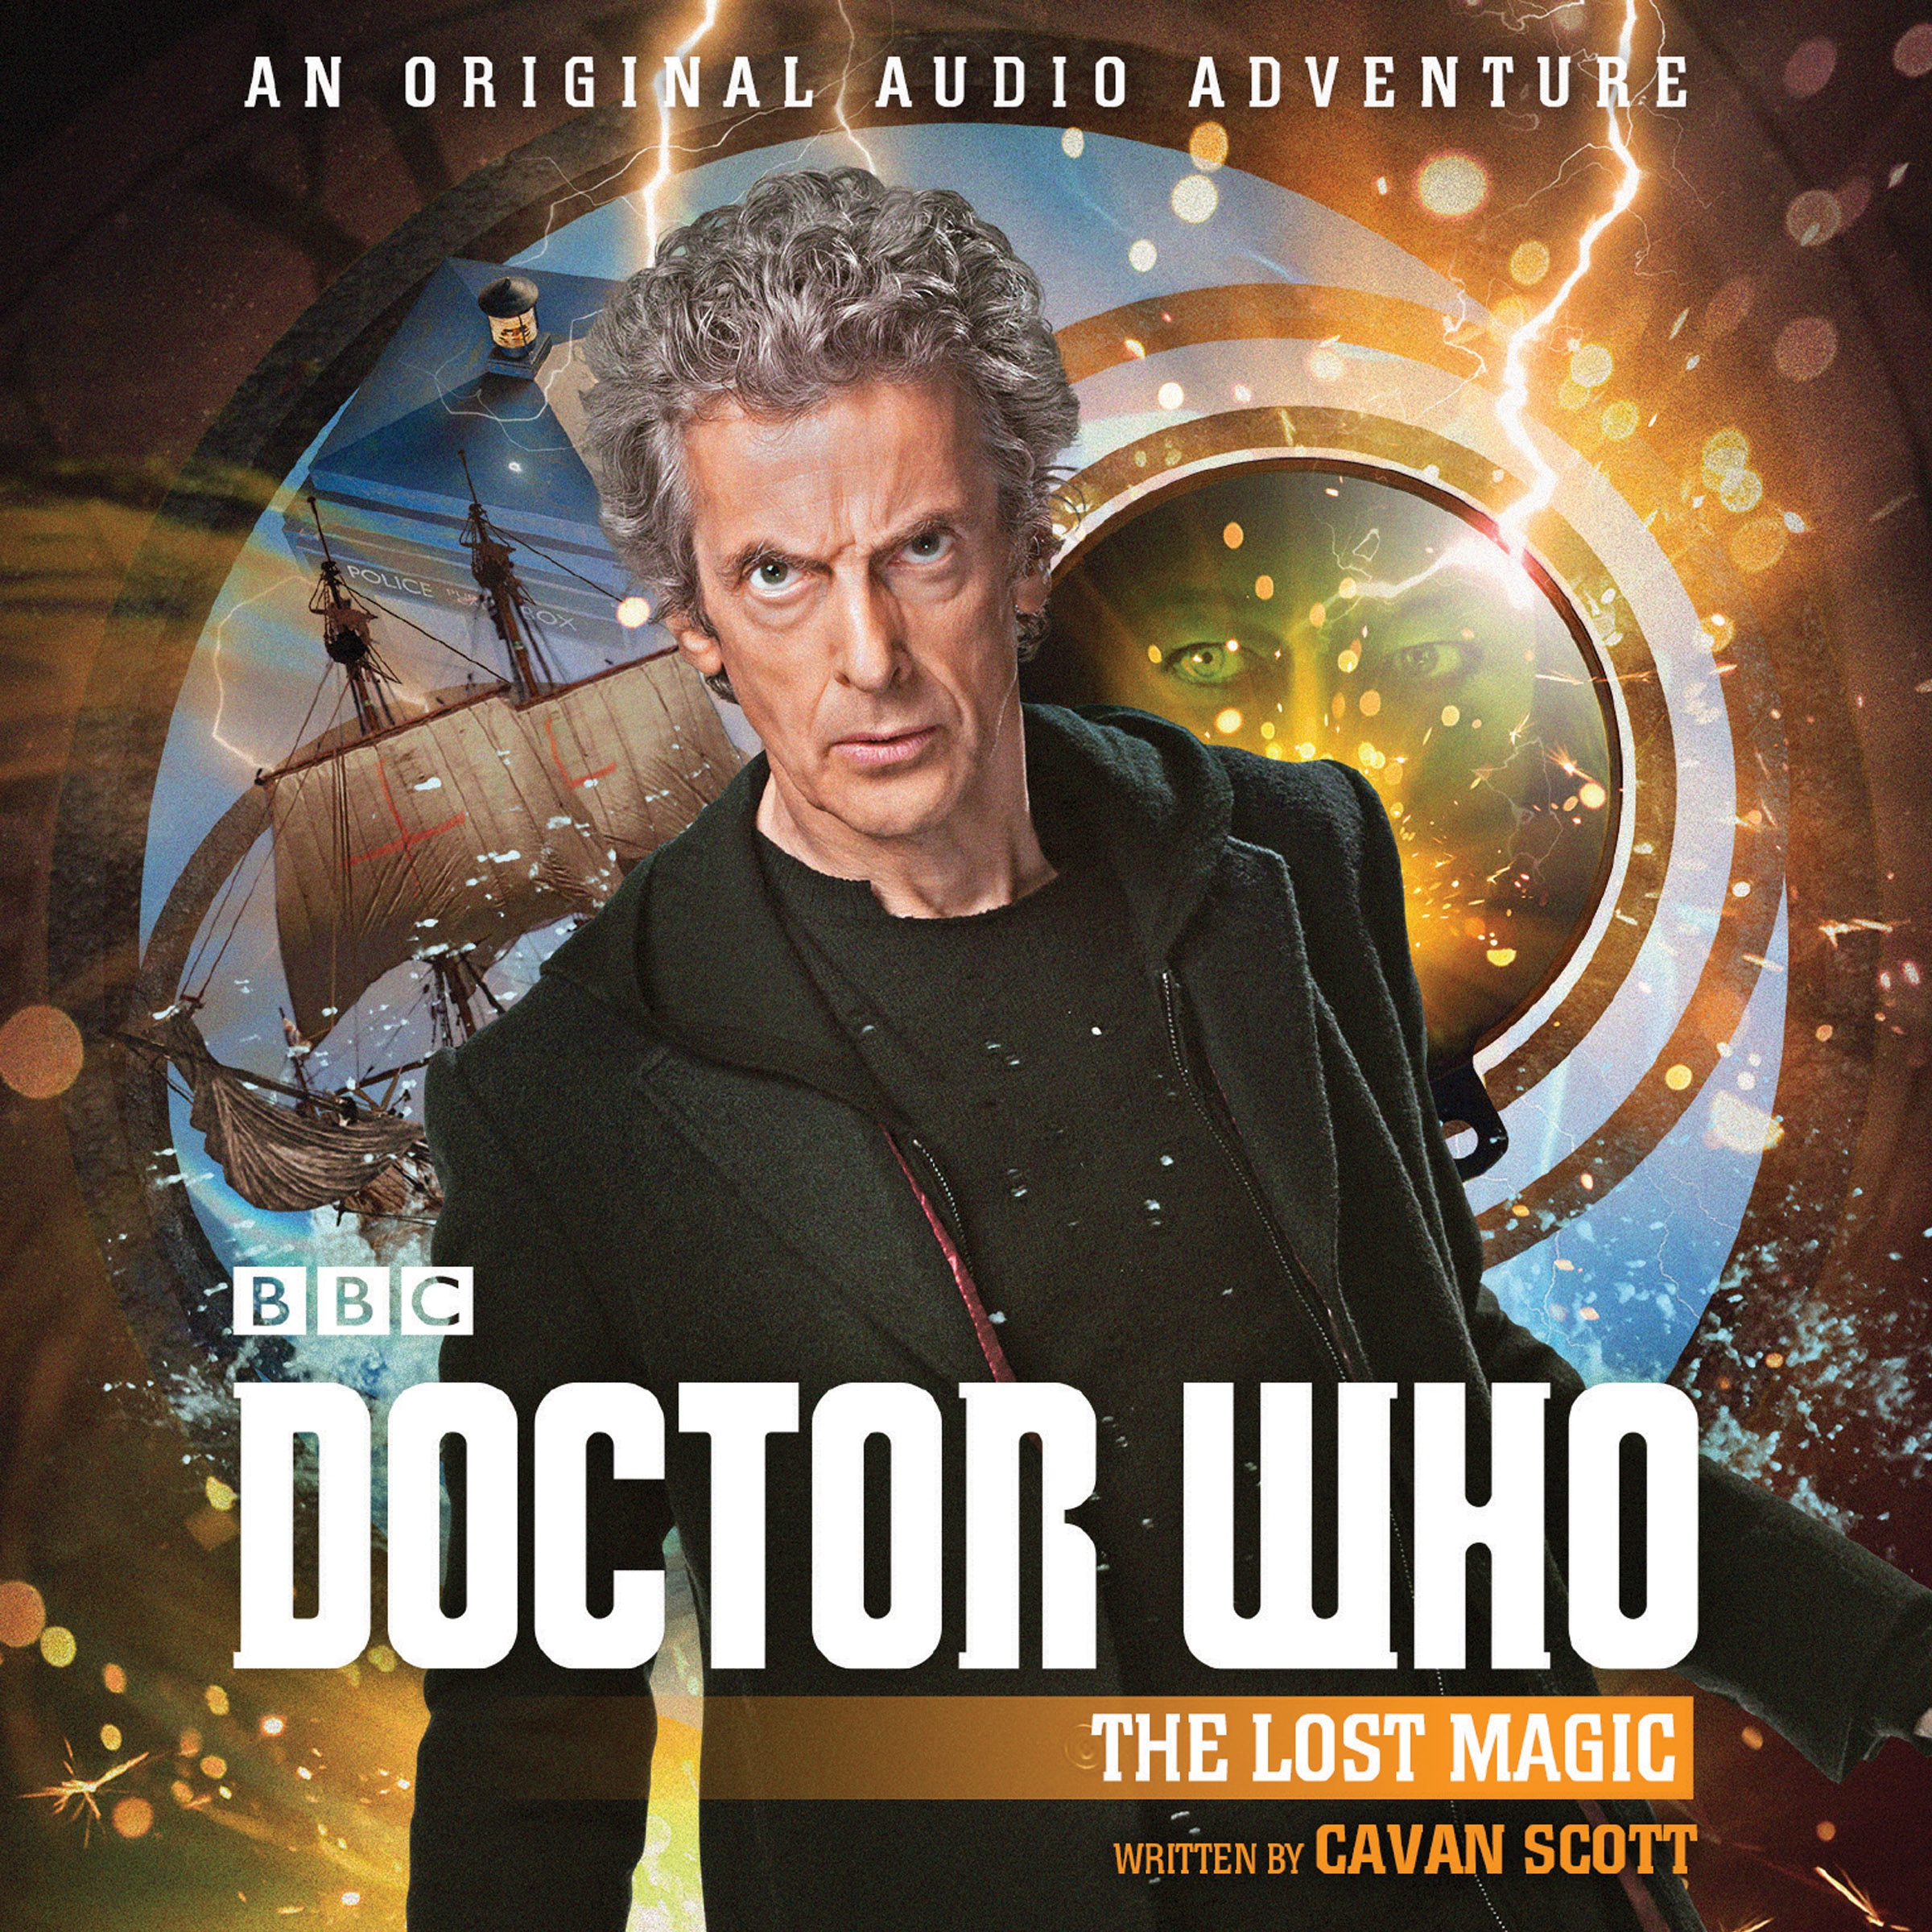 Doctor Who 'The Lost Magic' cover art